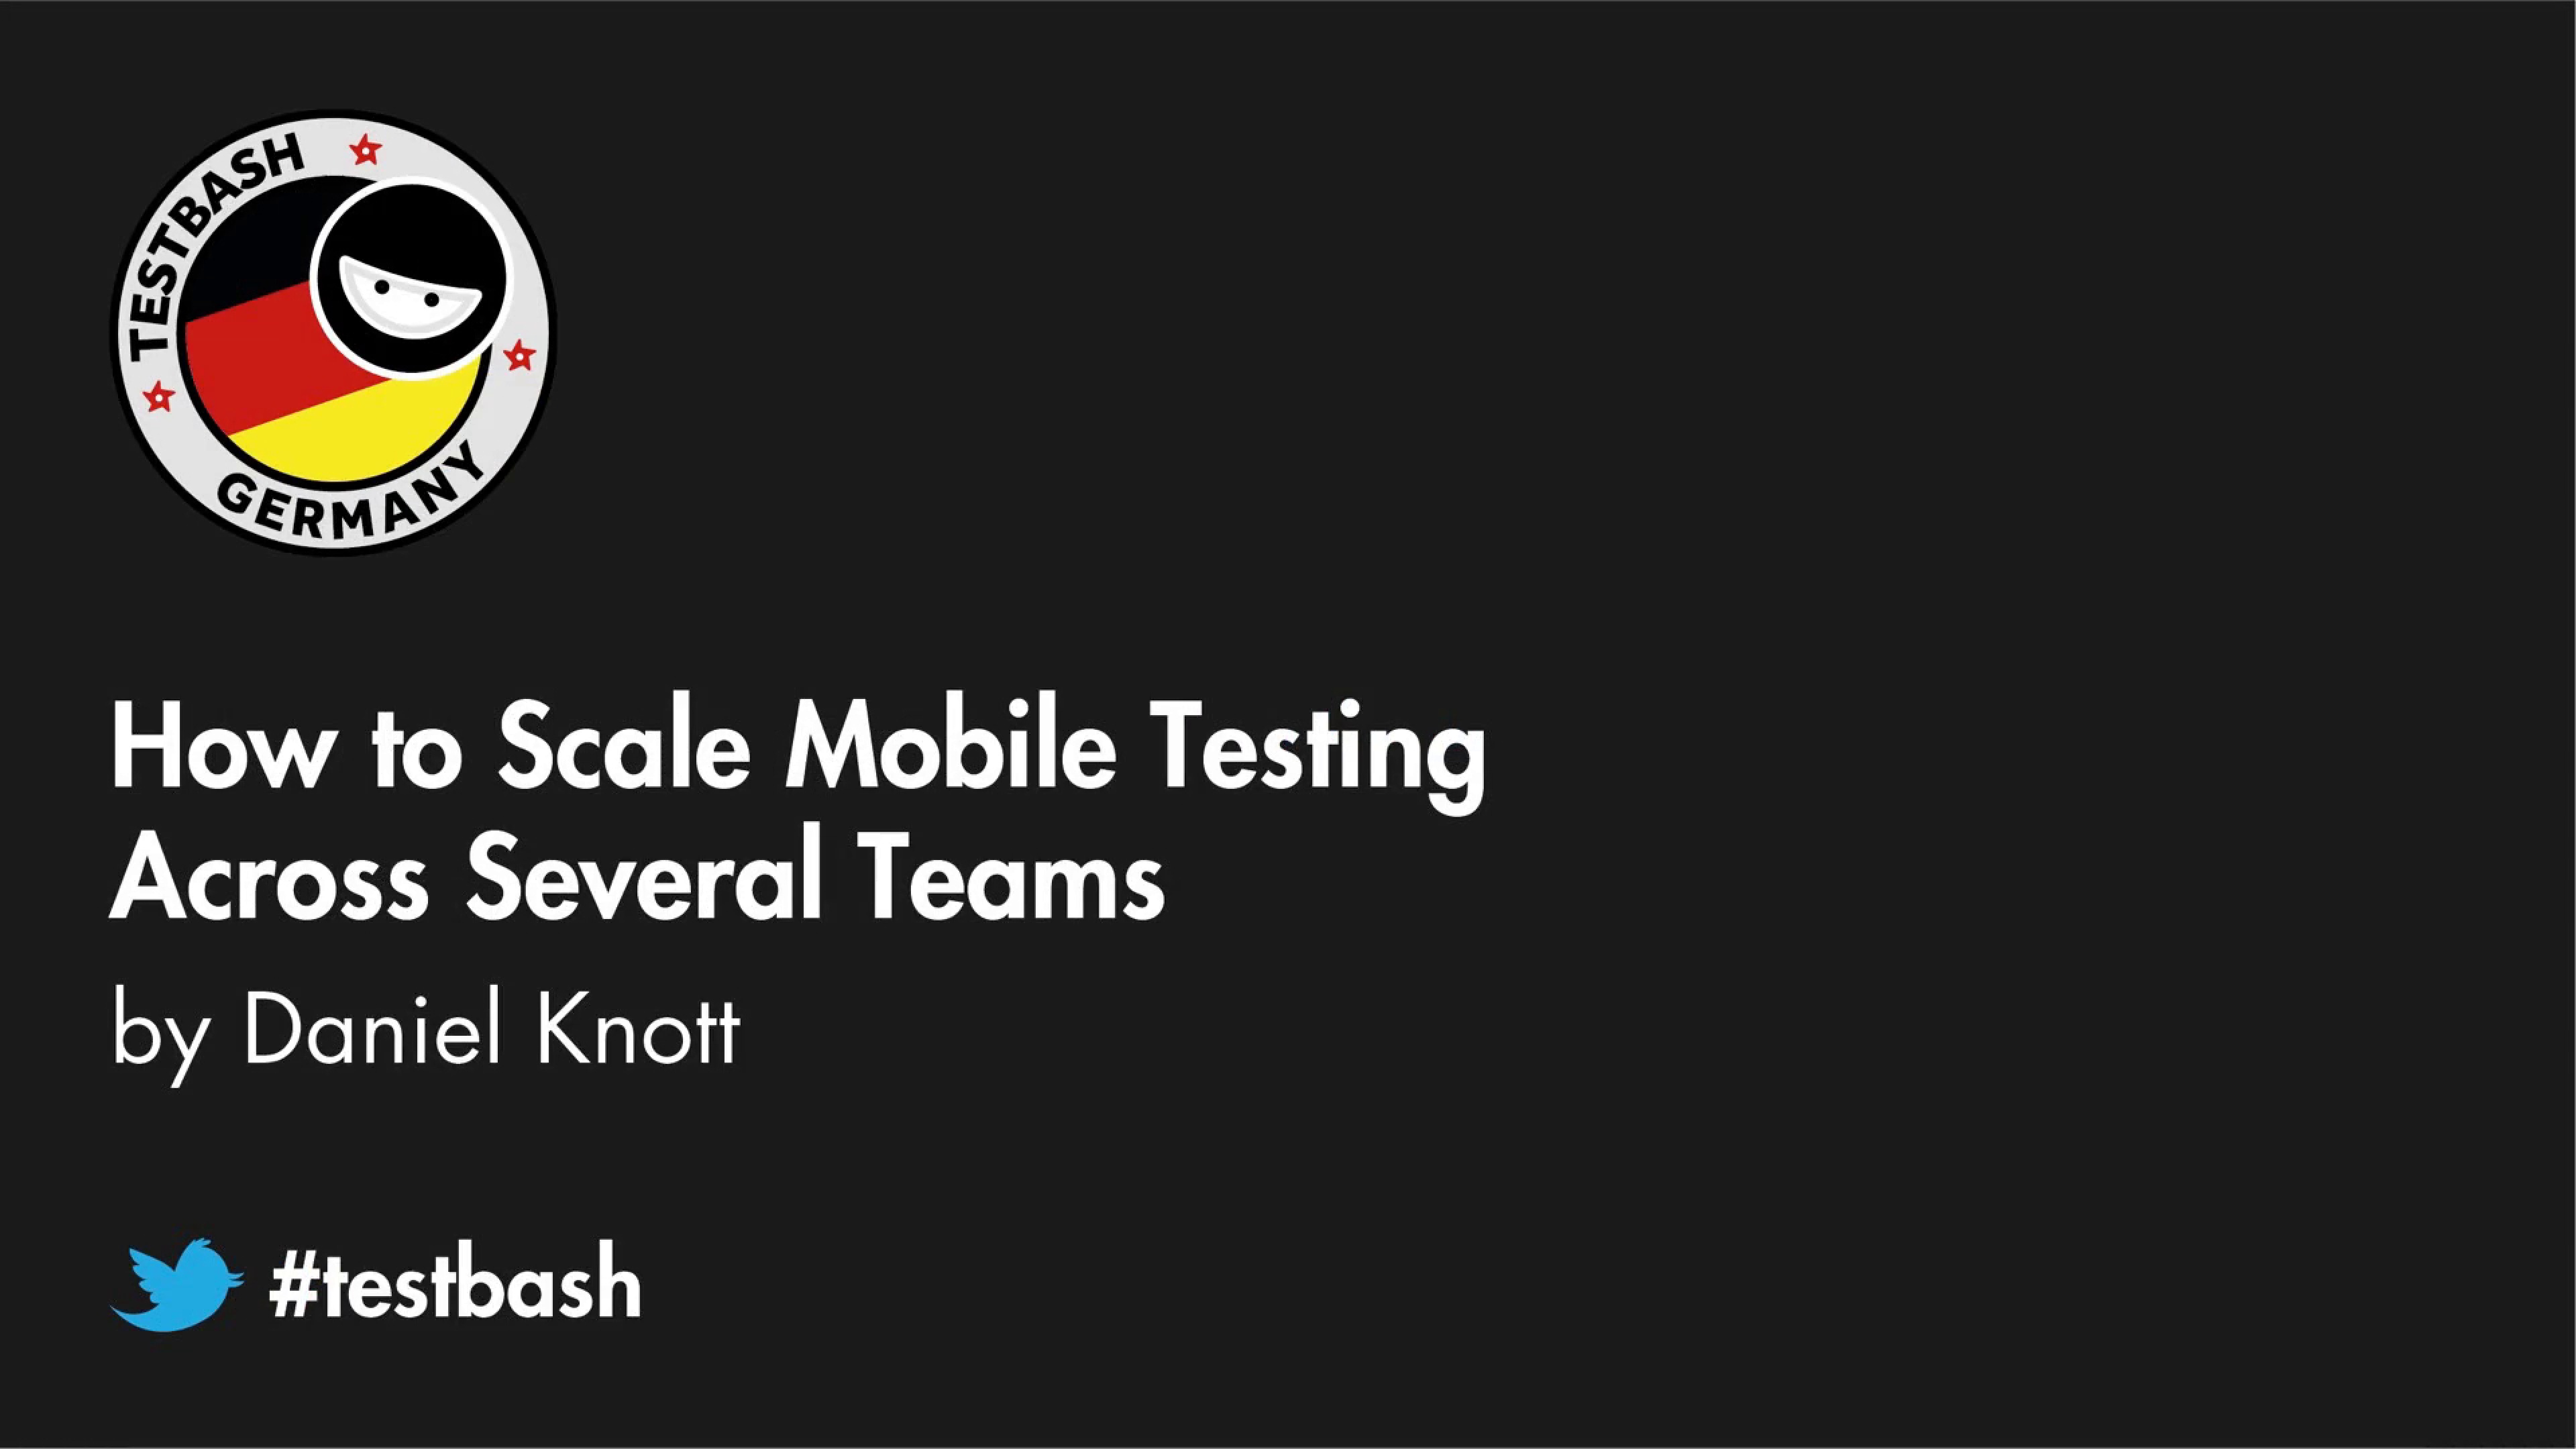 How To Scale Mobile Testing Across Several Teams - Daniel Knott